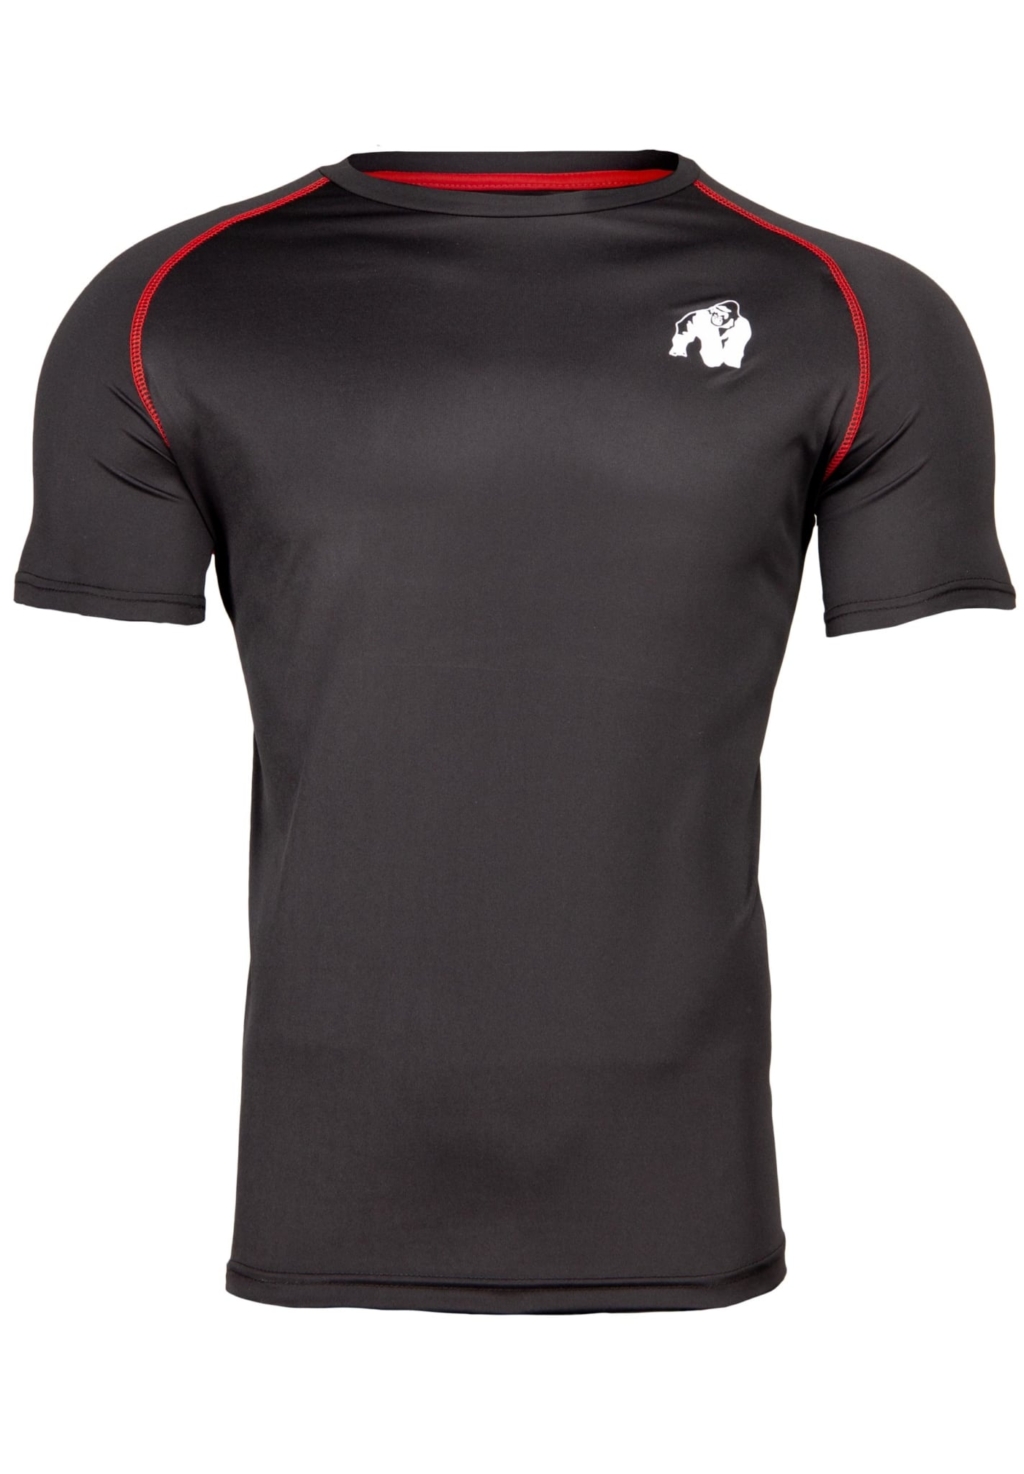 90515905 performance t shirt black red 1 scaled